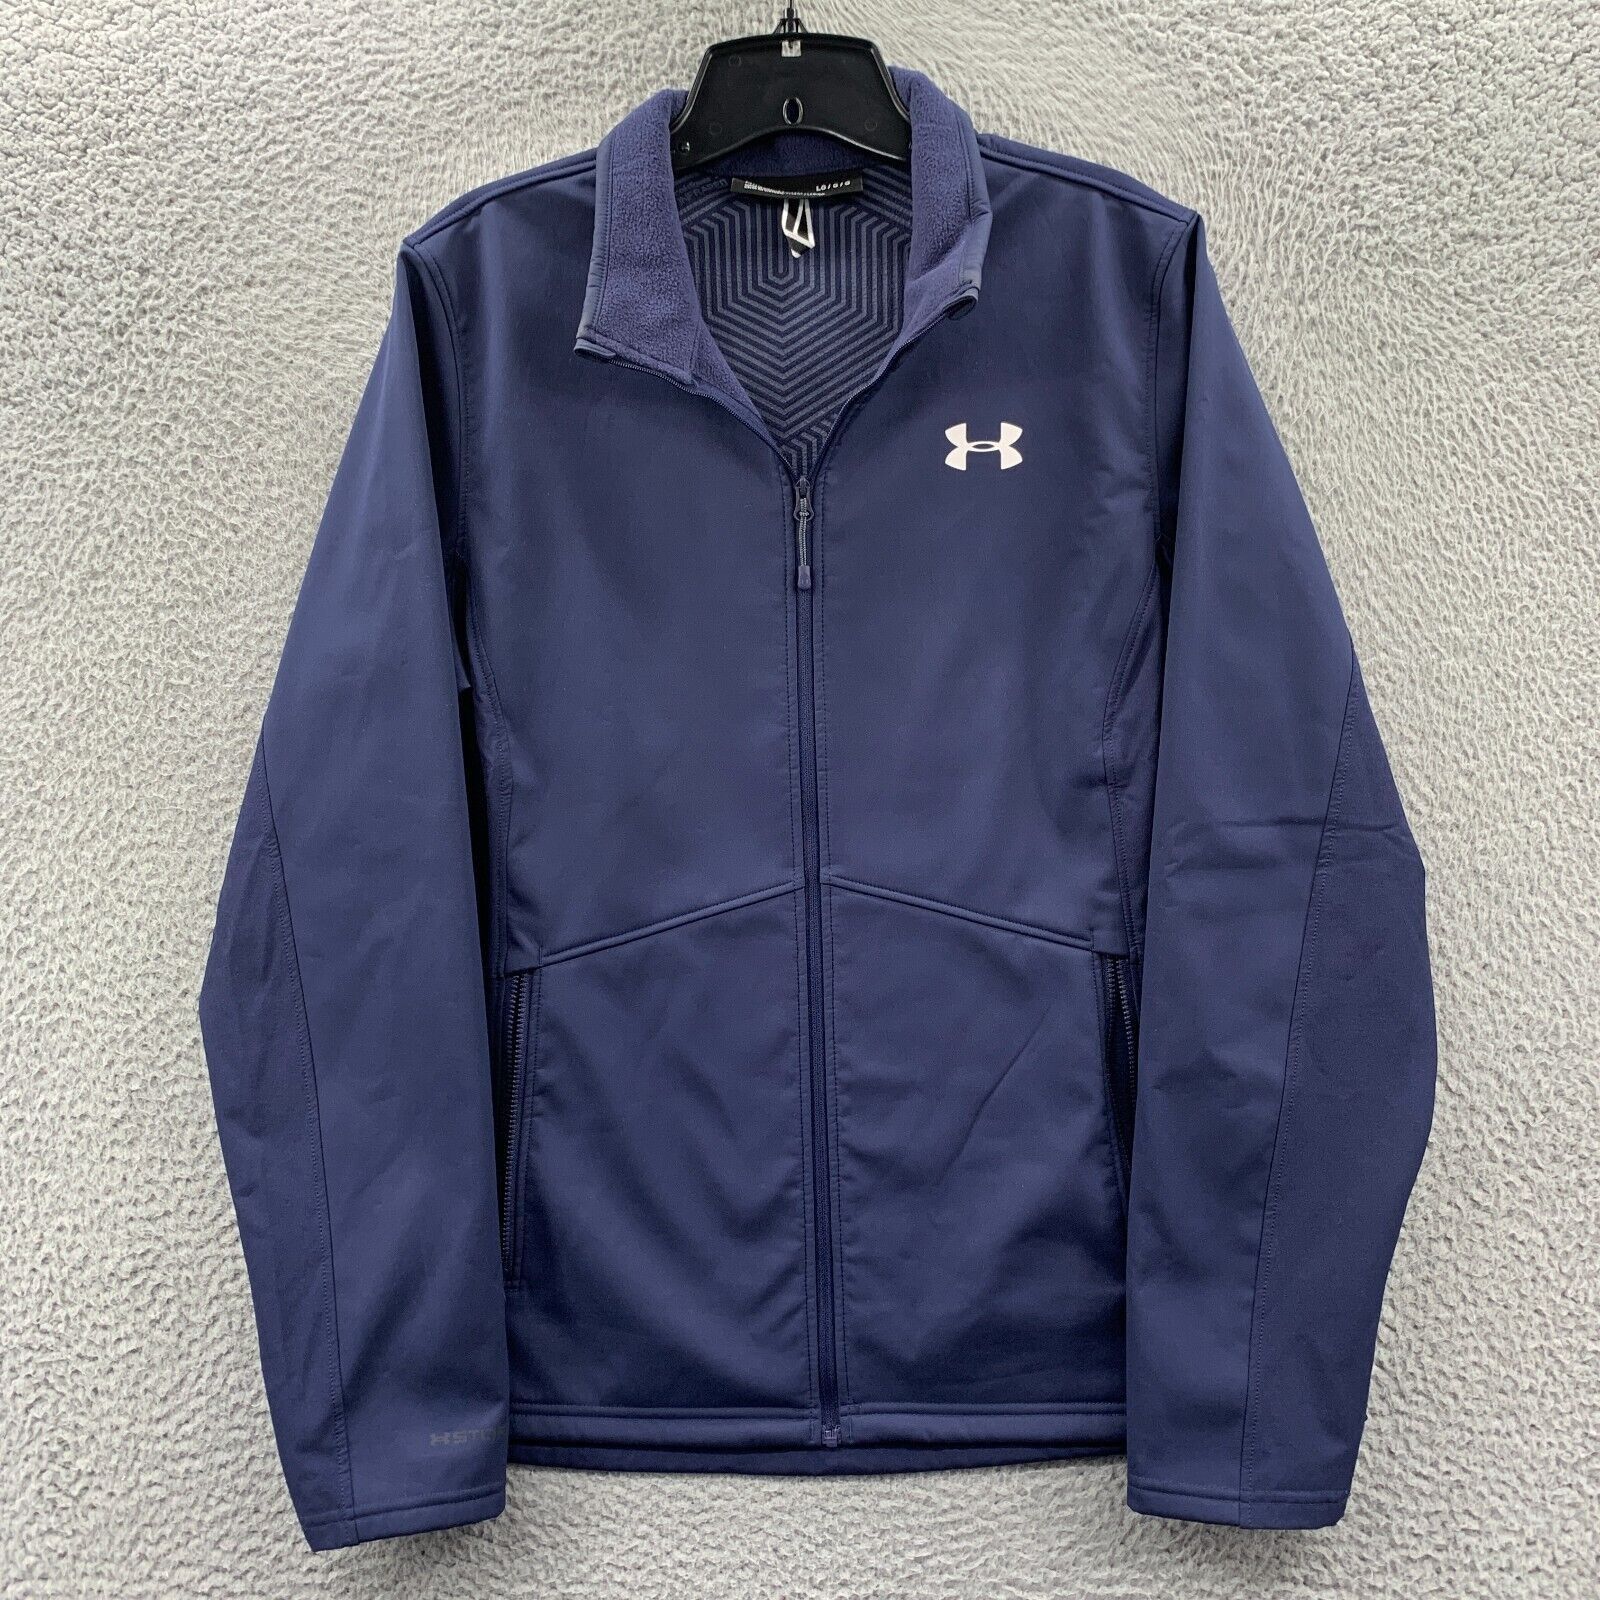 NWT NOTRE DAME COLLECTION UNDER ARMOUR COLDGEAR INFRARED FULL ZIP JACKET  LARGE